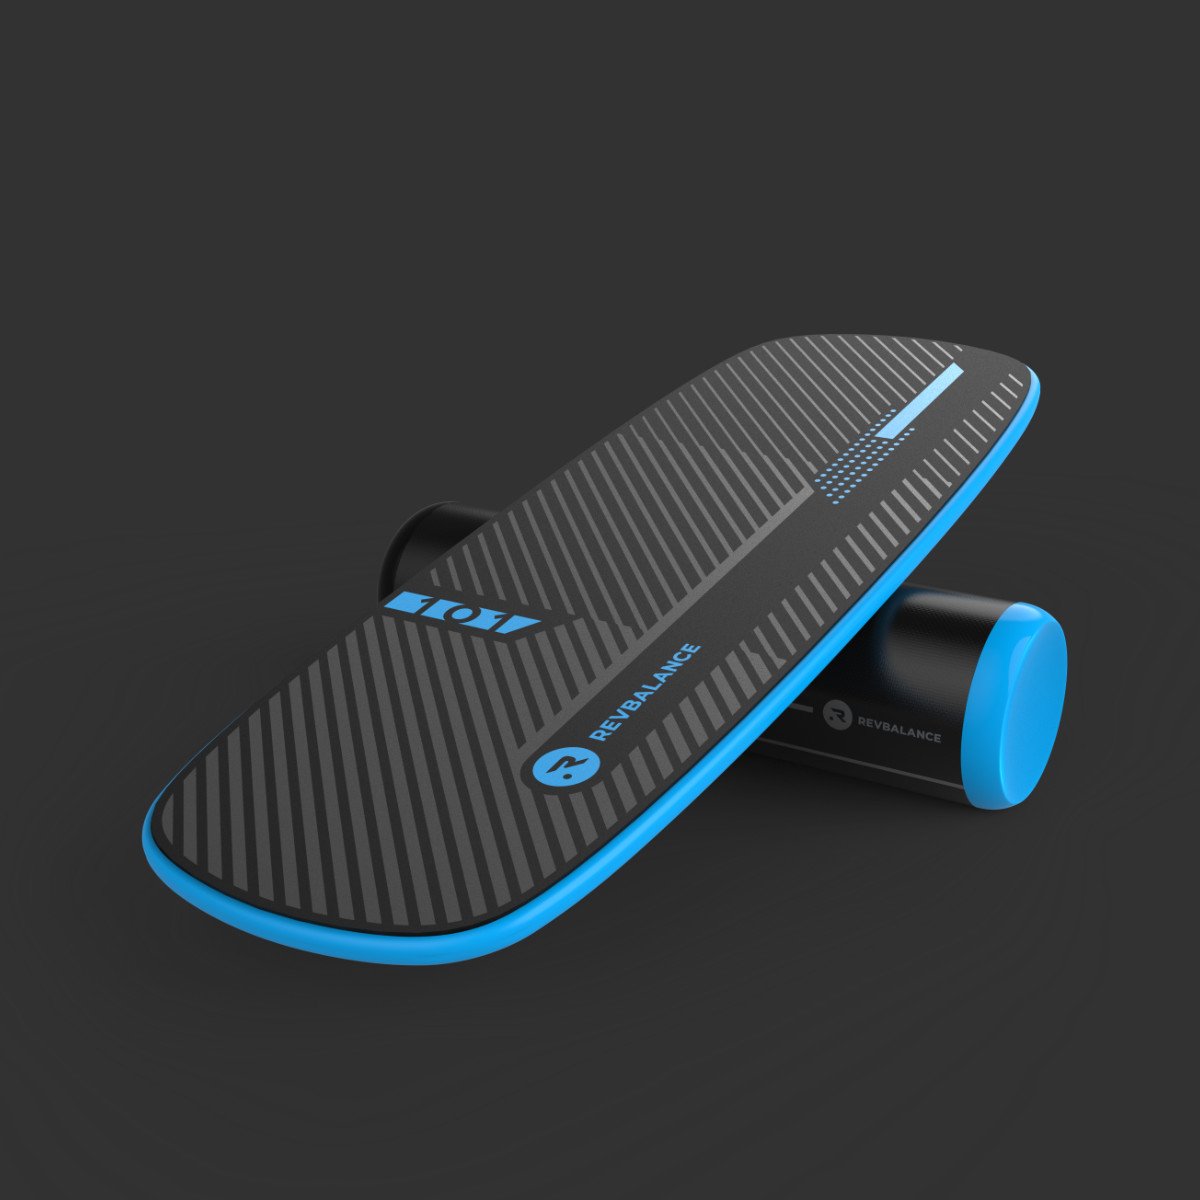 A blue and black Revolution 101 v2 Balance Board, a balance trainer and workout tool, on a black background.